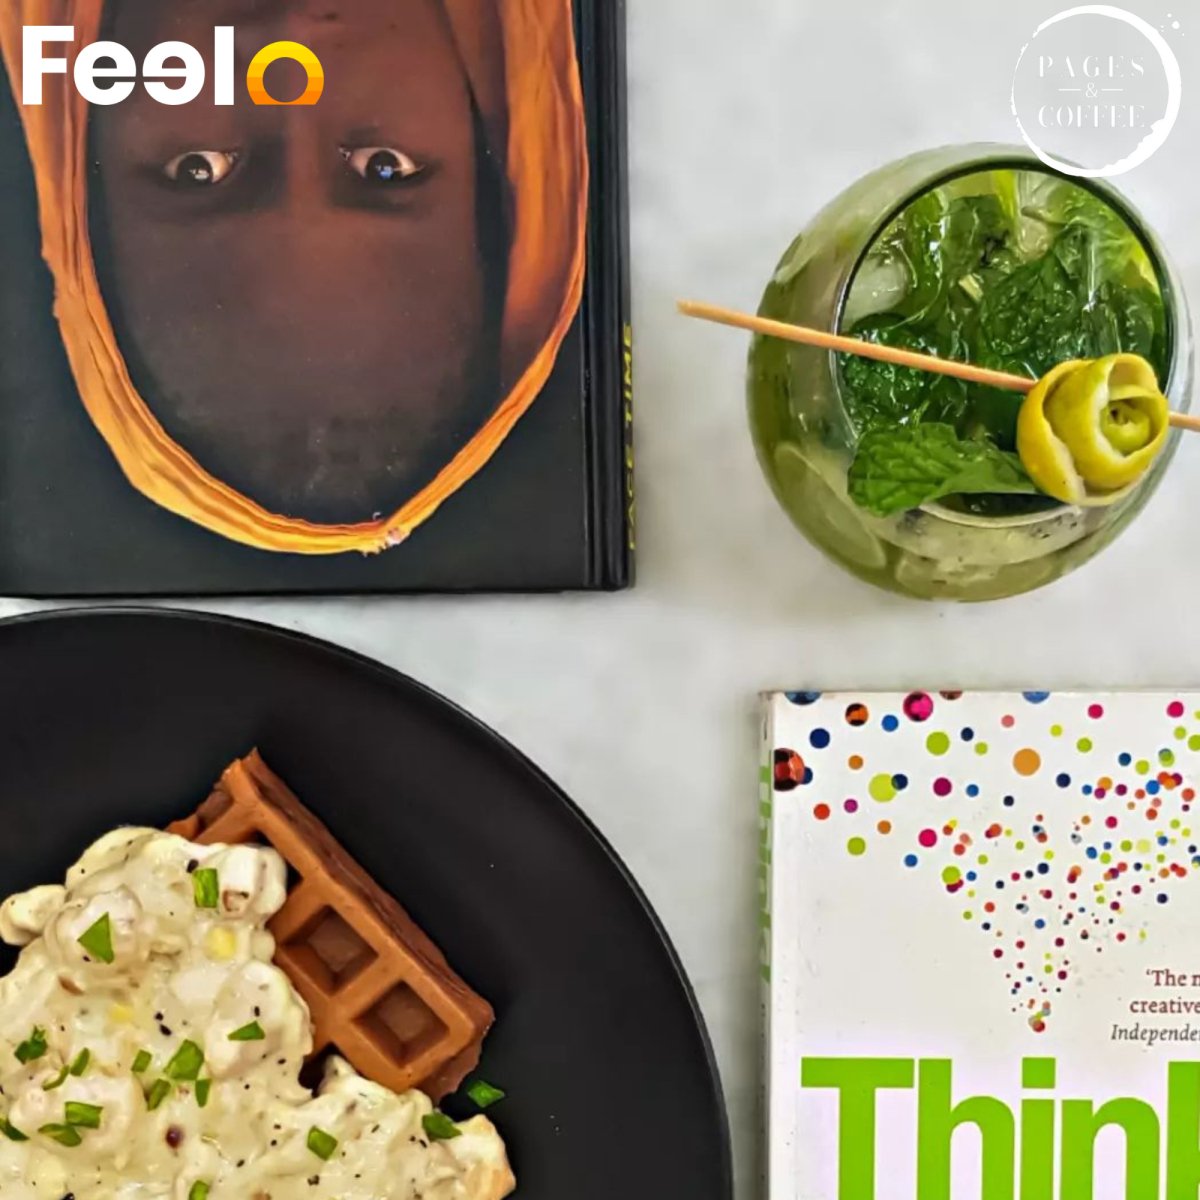 1x Creamy or Spicy Chicken Waffle + 1x Ice Tea of your choice - Pages & Coffee, Colombo - 06 | Feelo